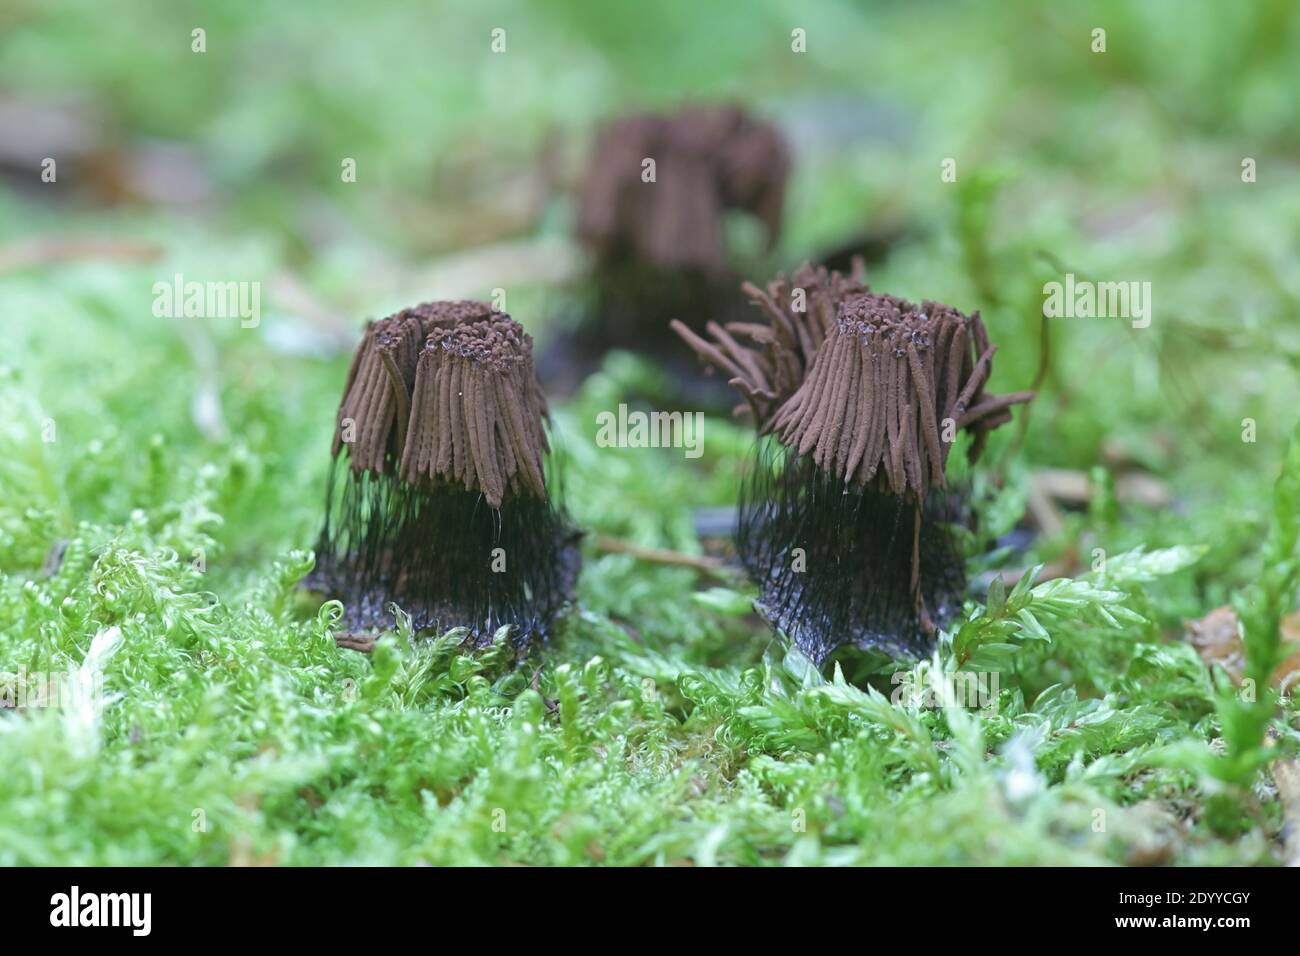 Stemonitis fusca, tube slime mold from Finland with no common english name Stock Photo